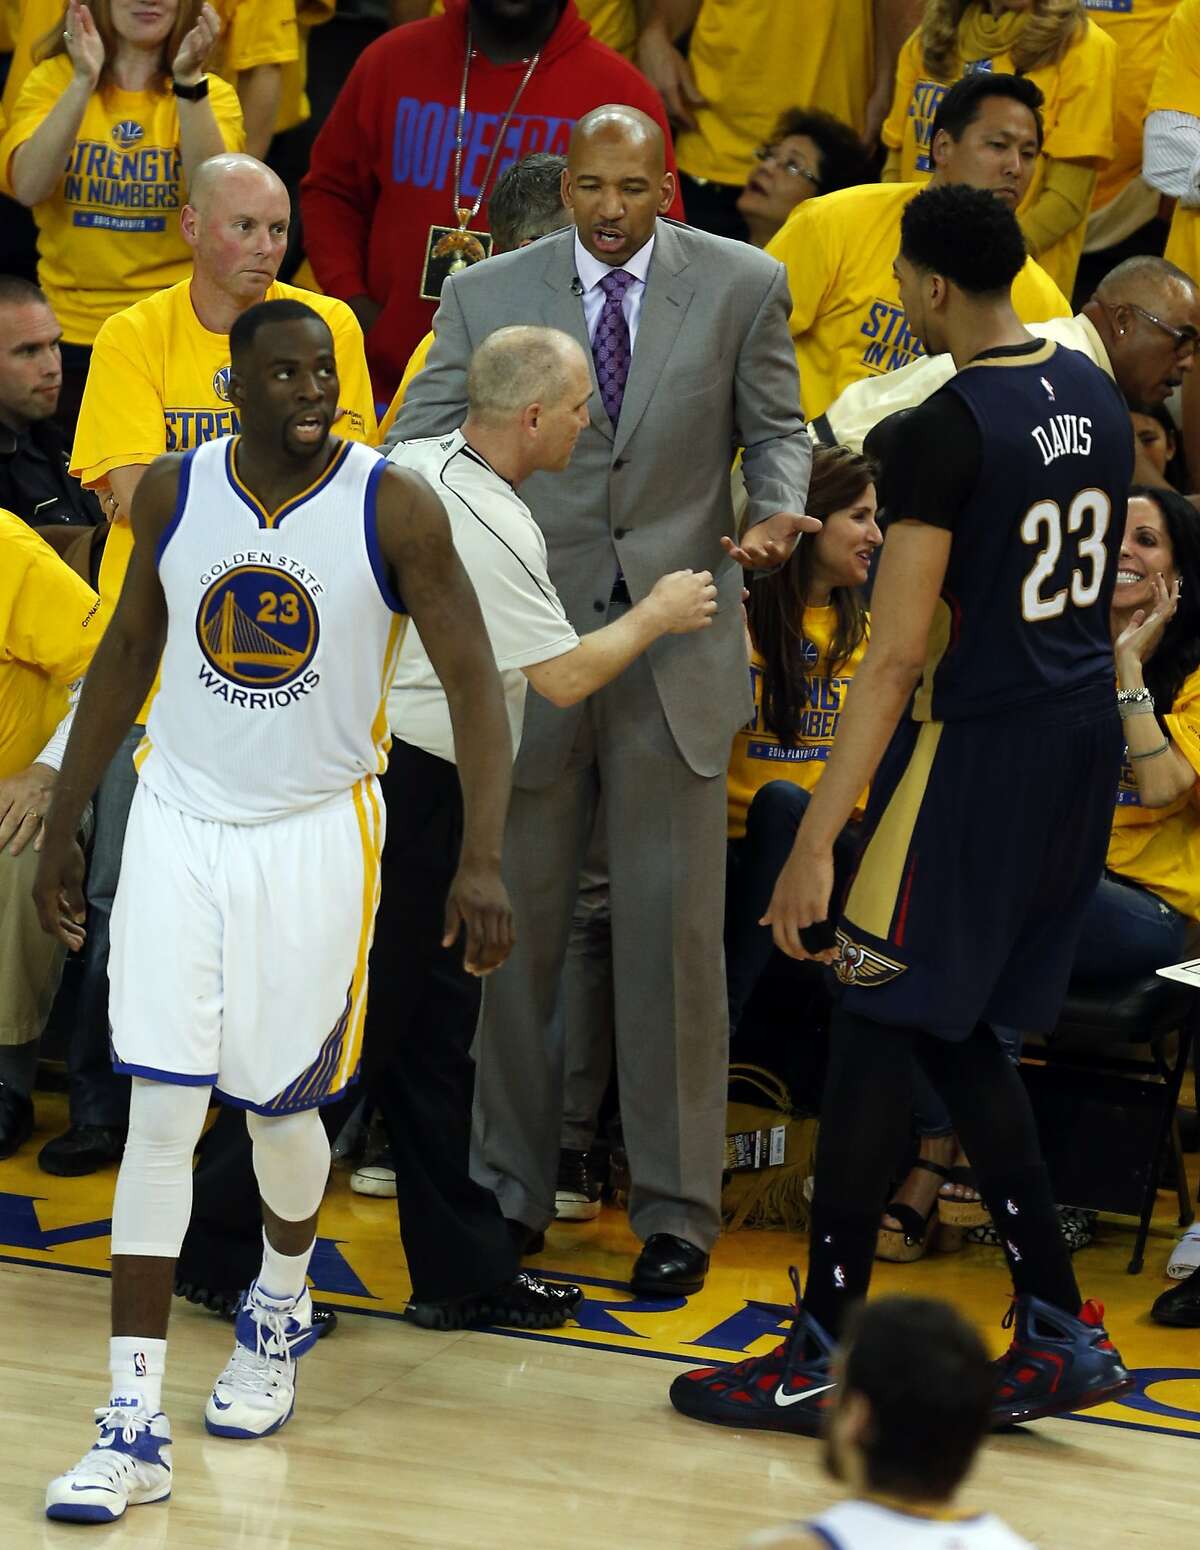 New Orleans Pelicans' head coach Monty Williams and Anthony Davis question official's call in 4th quarter of 97-87 loss to Golden State Warriors during Game 2 of the 1st Round of NBA Western Conference Playoffs at Oracle Arena in Oakland, Calif., on Monday, April 20, 2015.